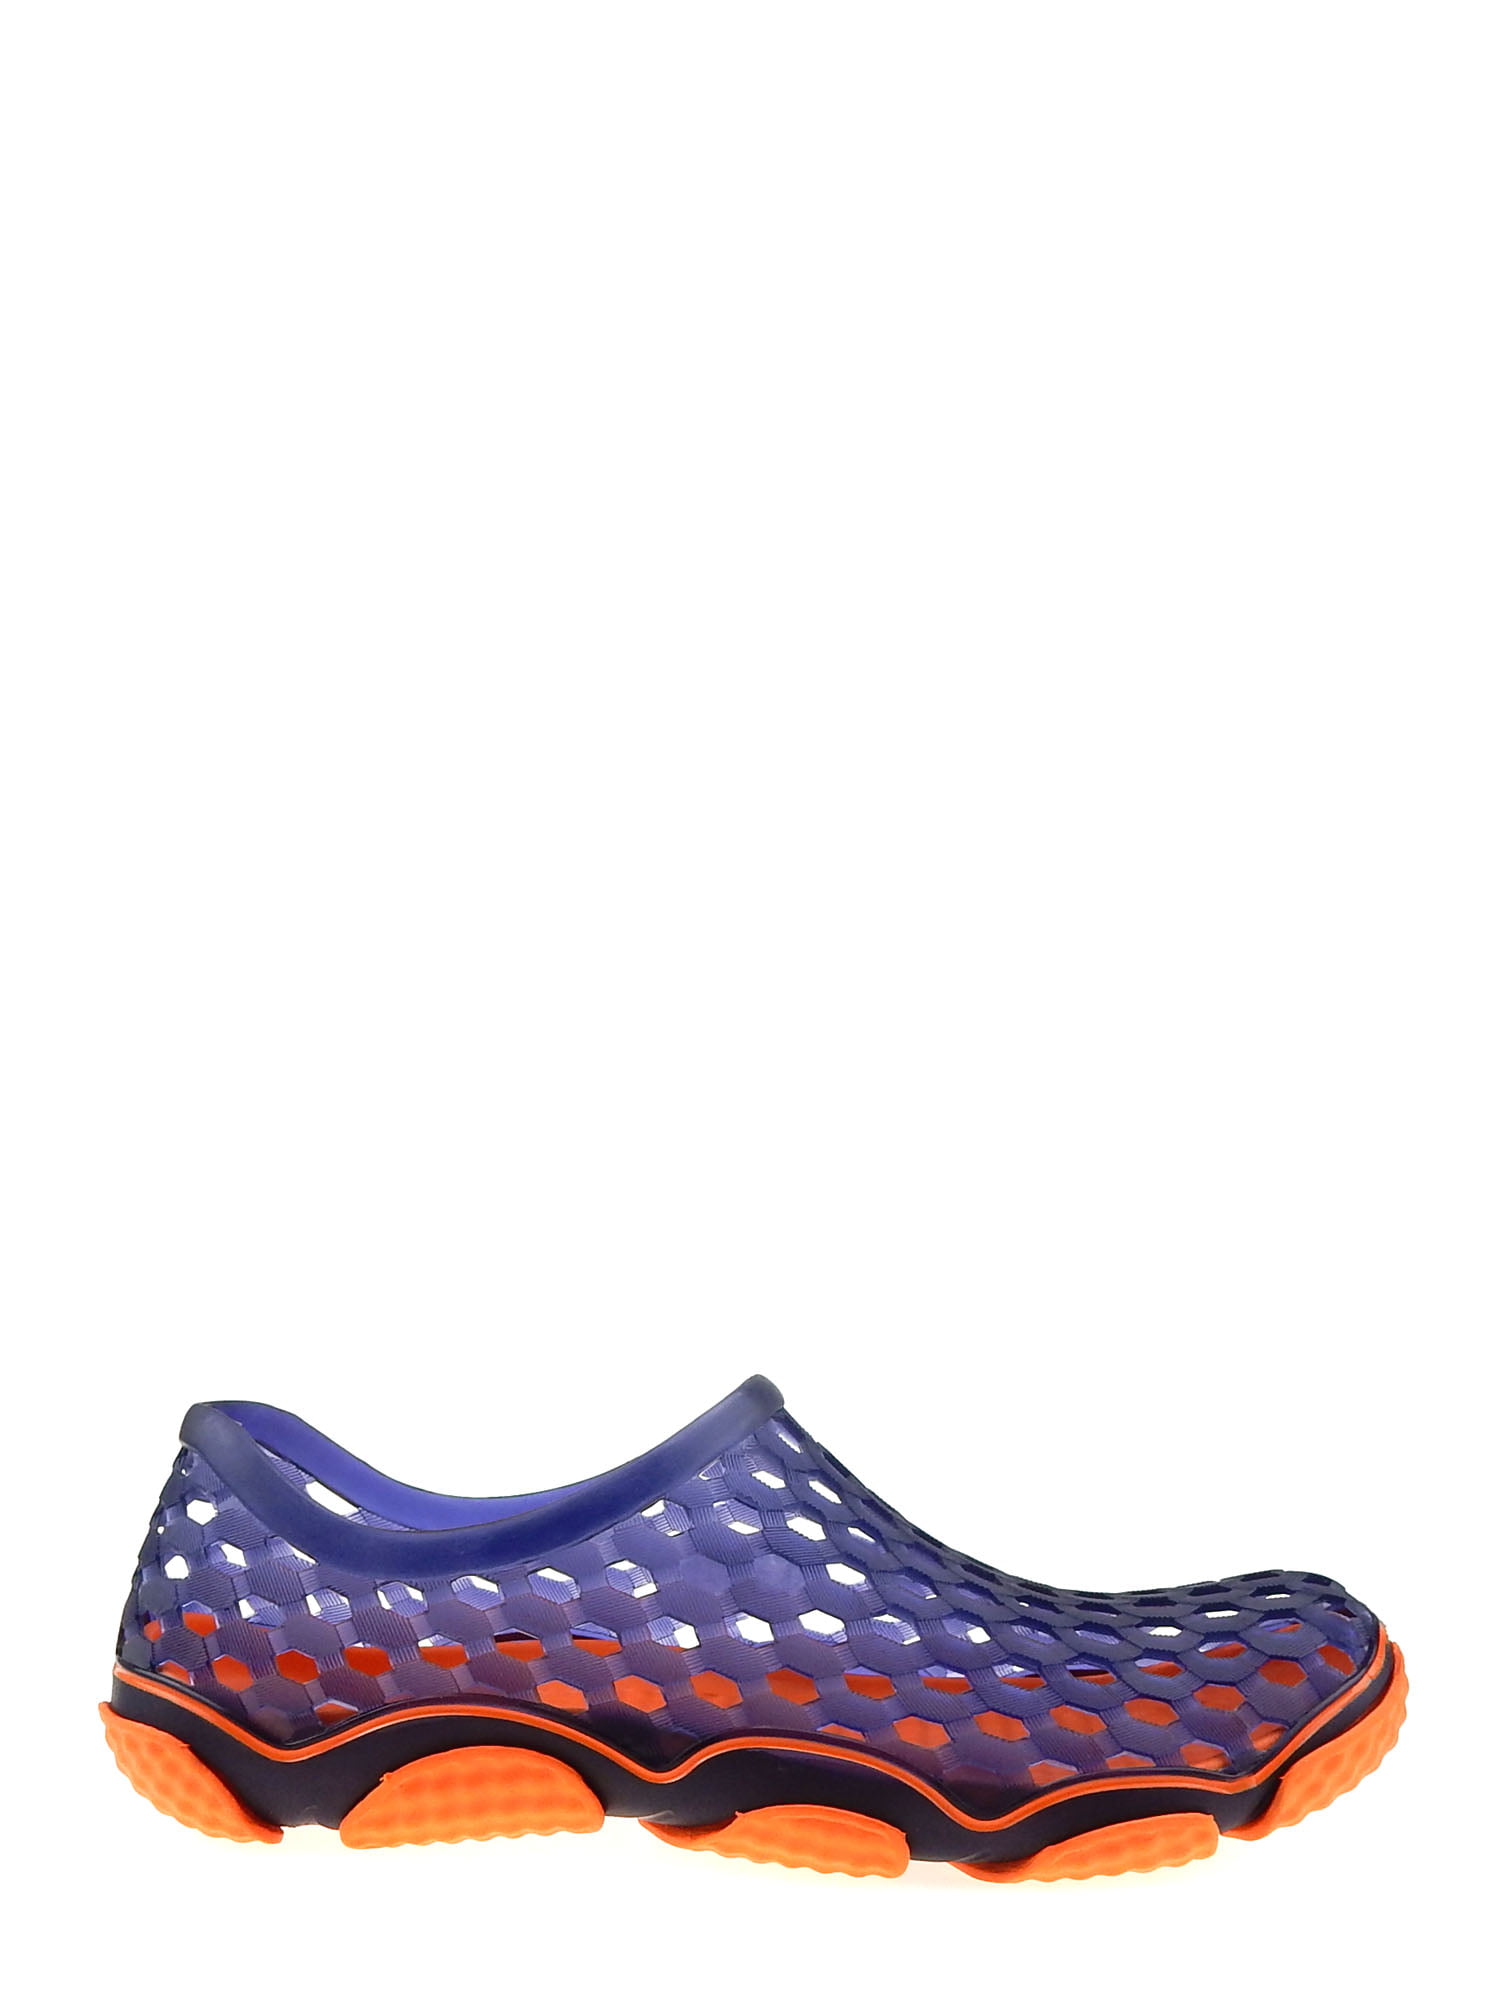 athletic works water shoes